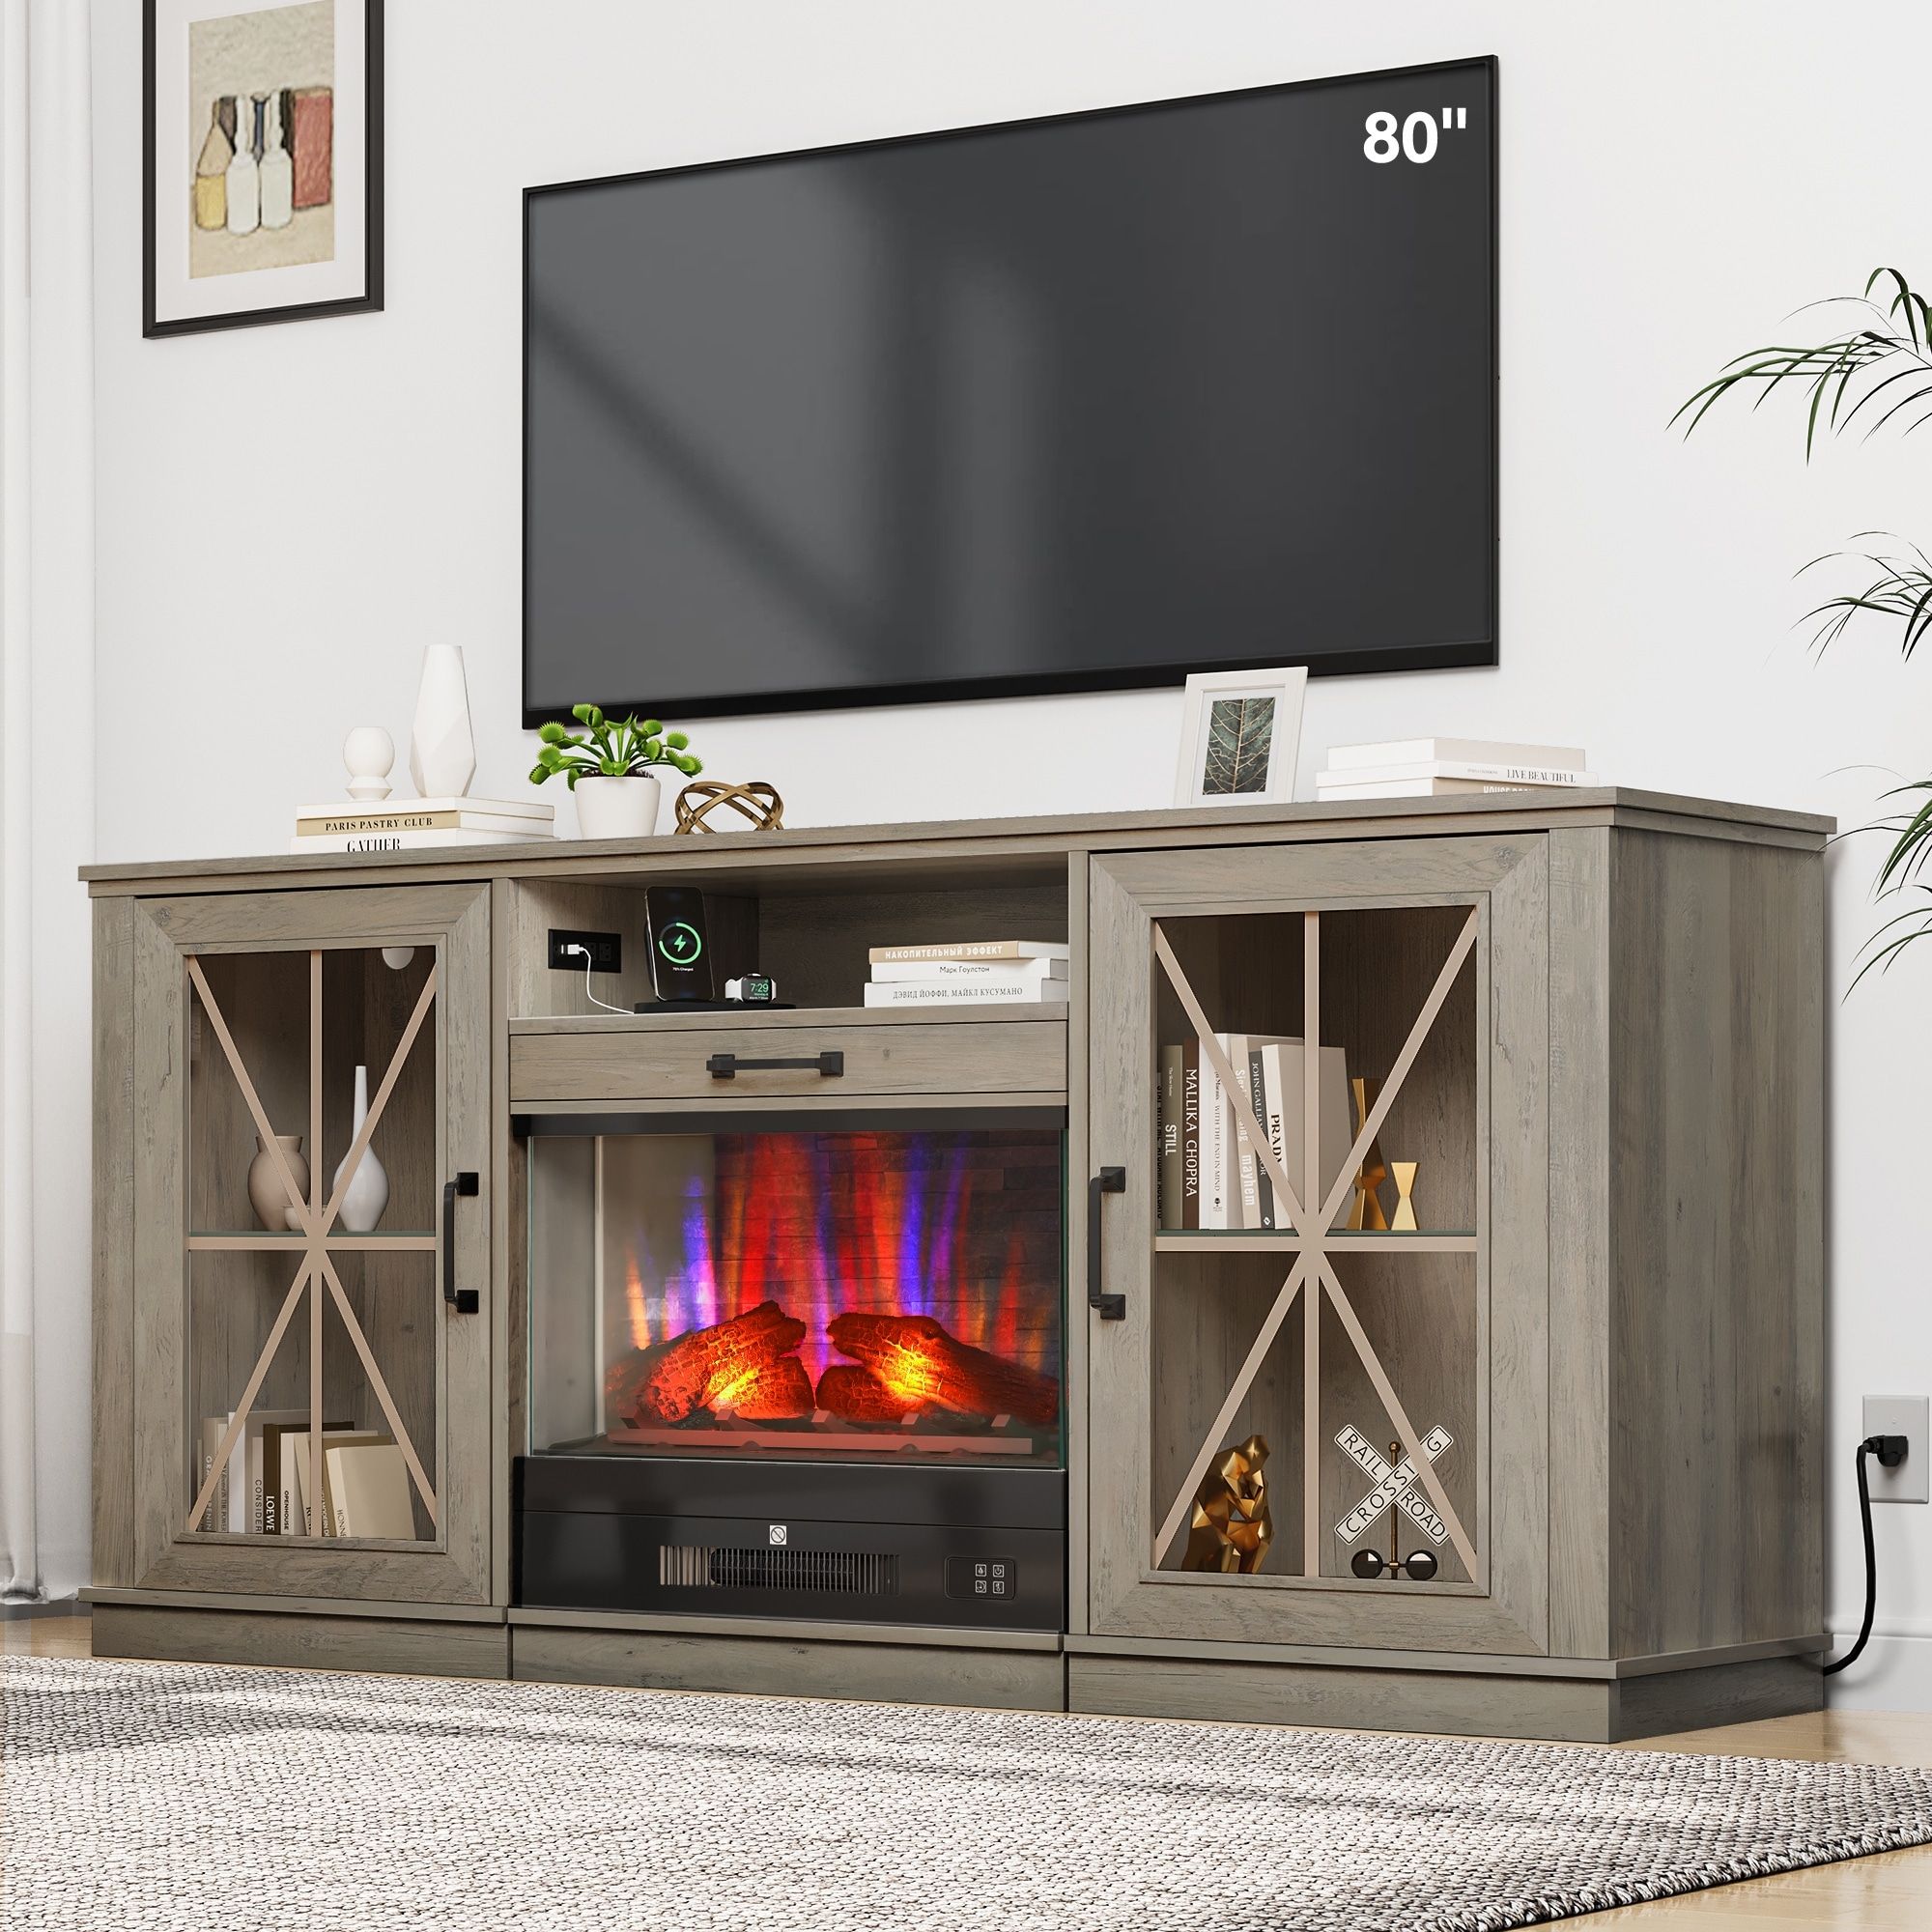 Modern Fireplace Tv Stand With Drawable Fireplace – On Sale – Bed Bath &  Beyond – 38403615 Pertaining To Modern Fireplace Tv Stands (View 3 of 15)